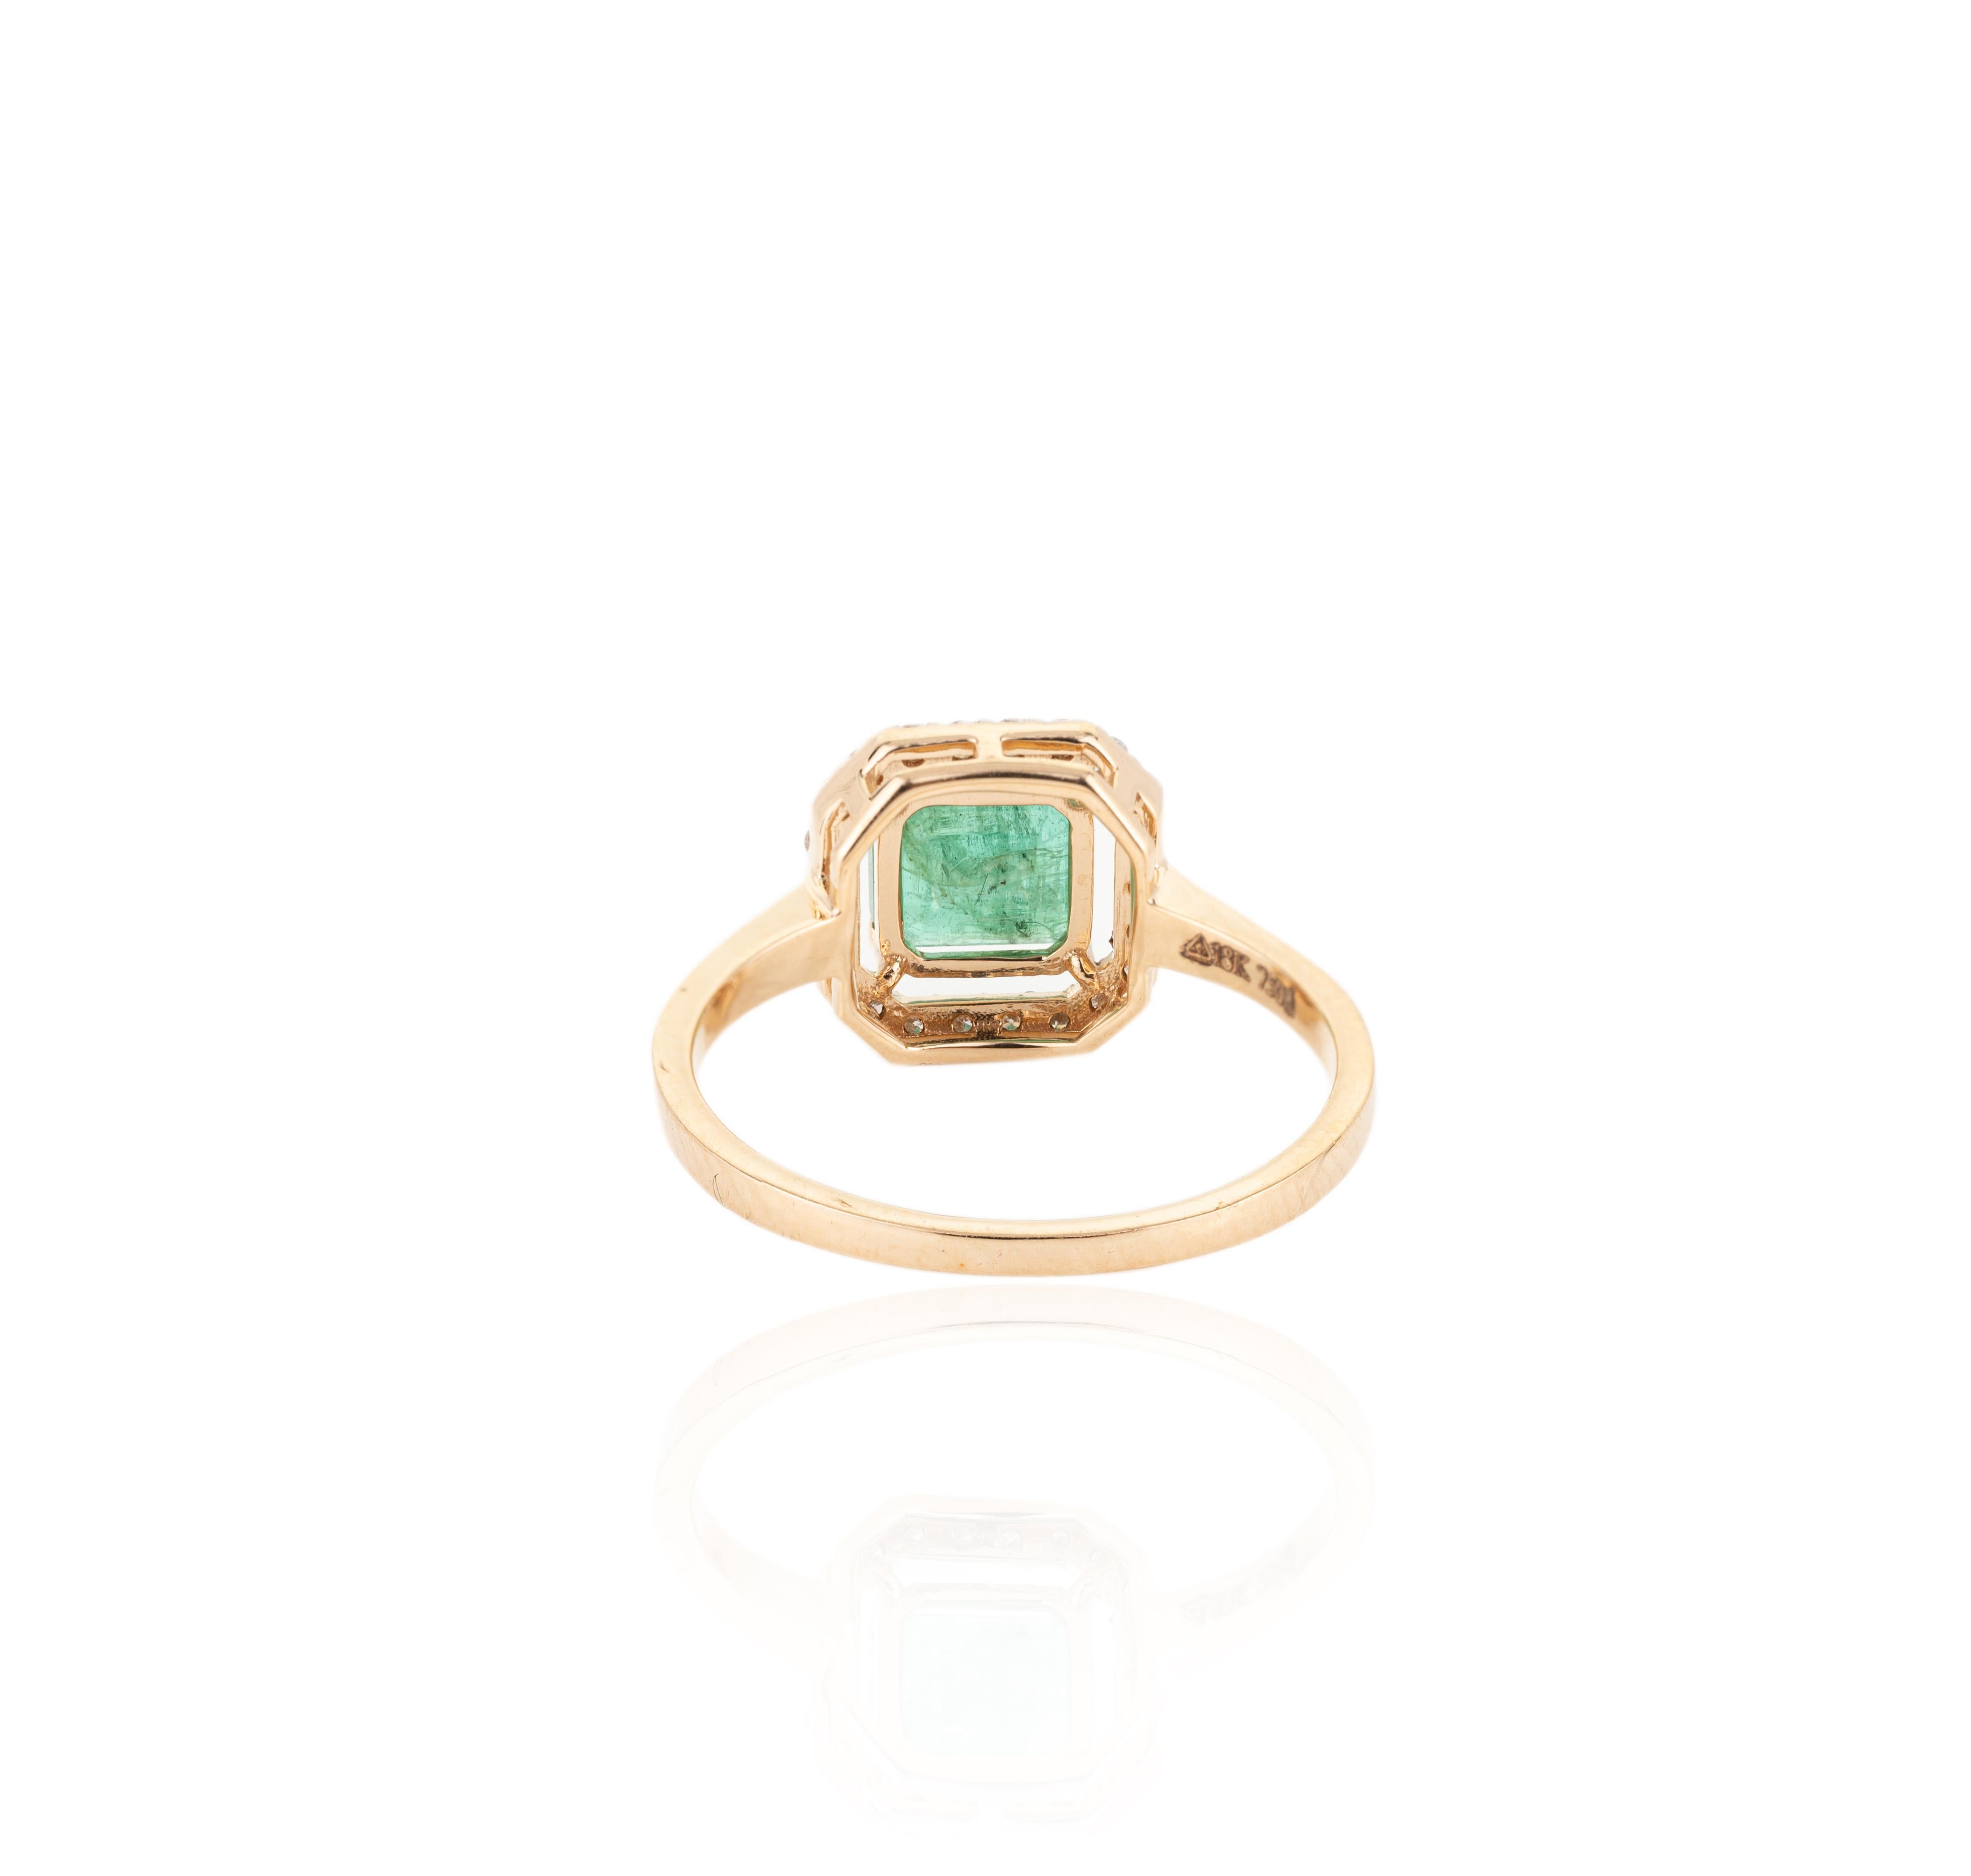 For Sale:  Certified 2.7 Carat Octagon Emerald Halo Diamond Wedding Ring in 18k Yellow Gold 6